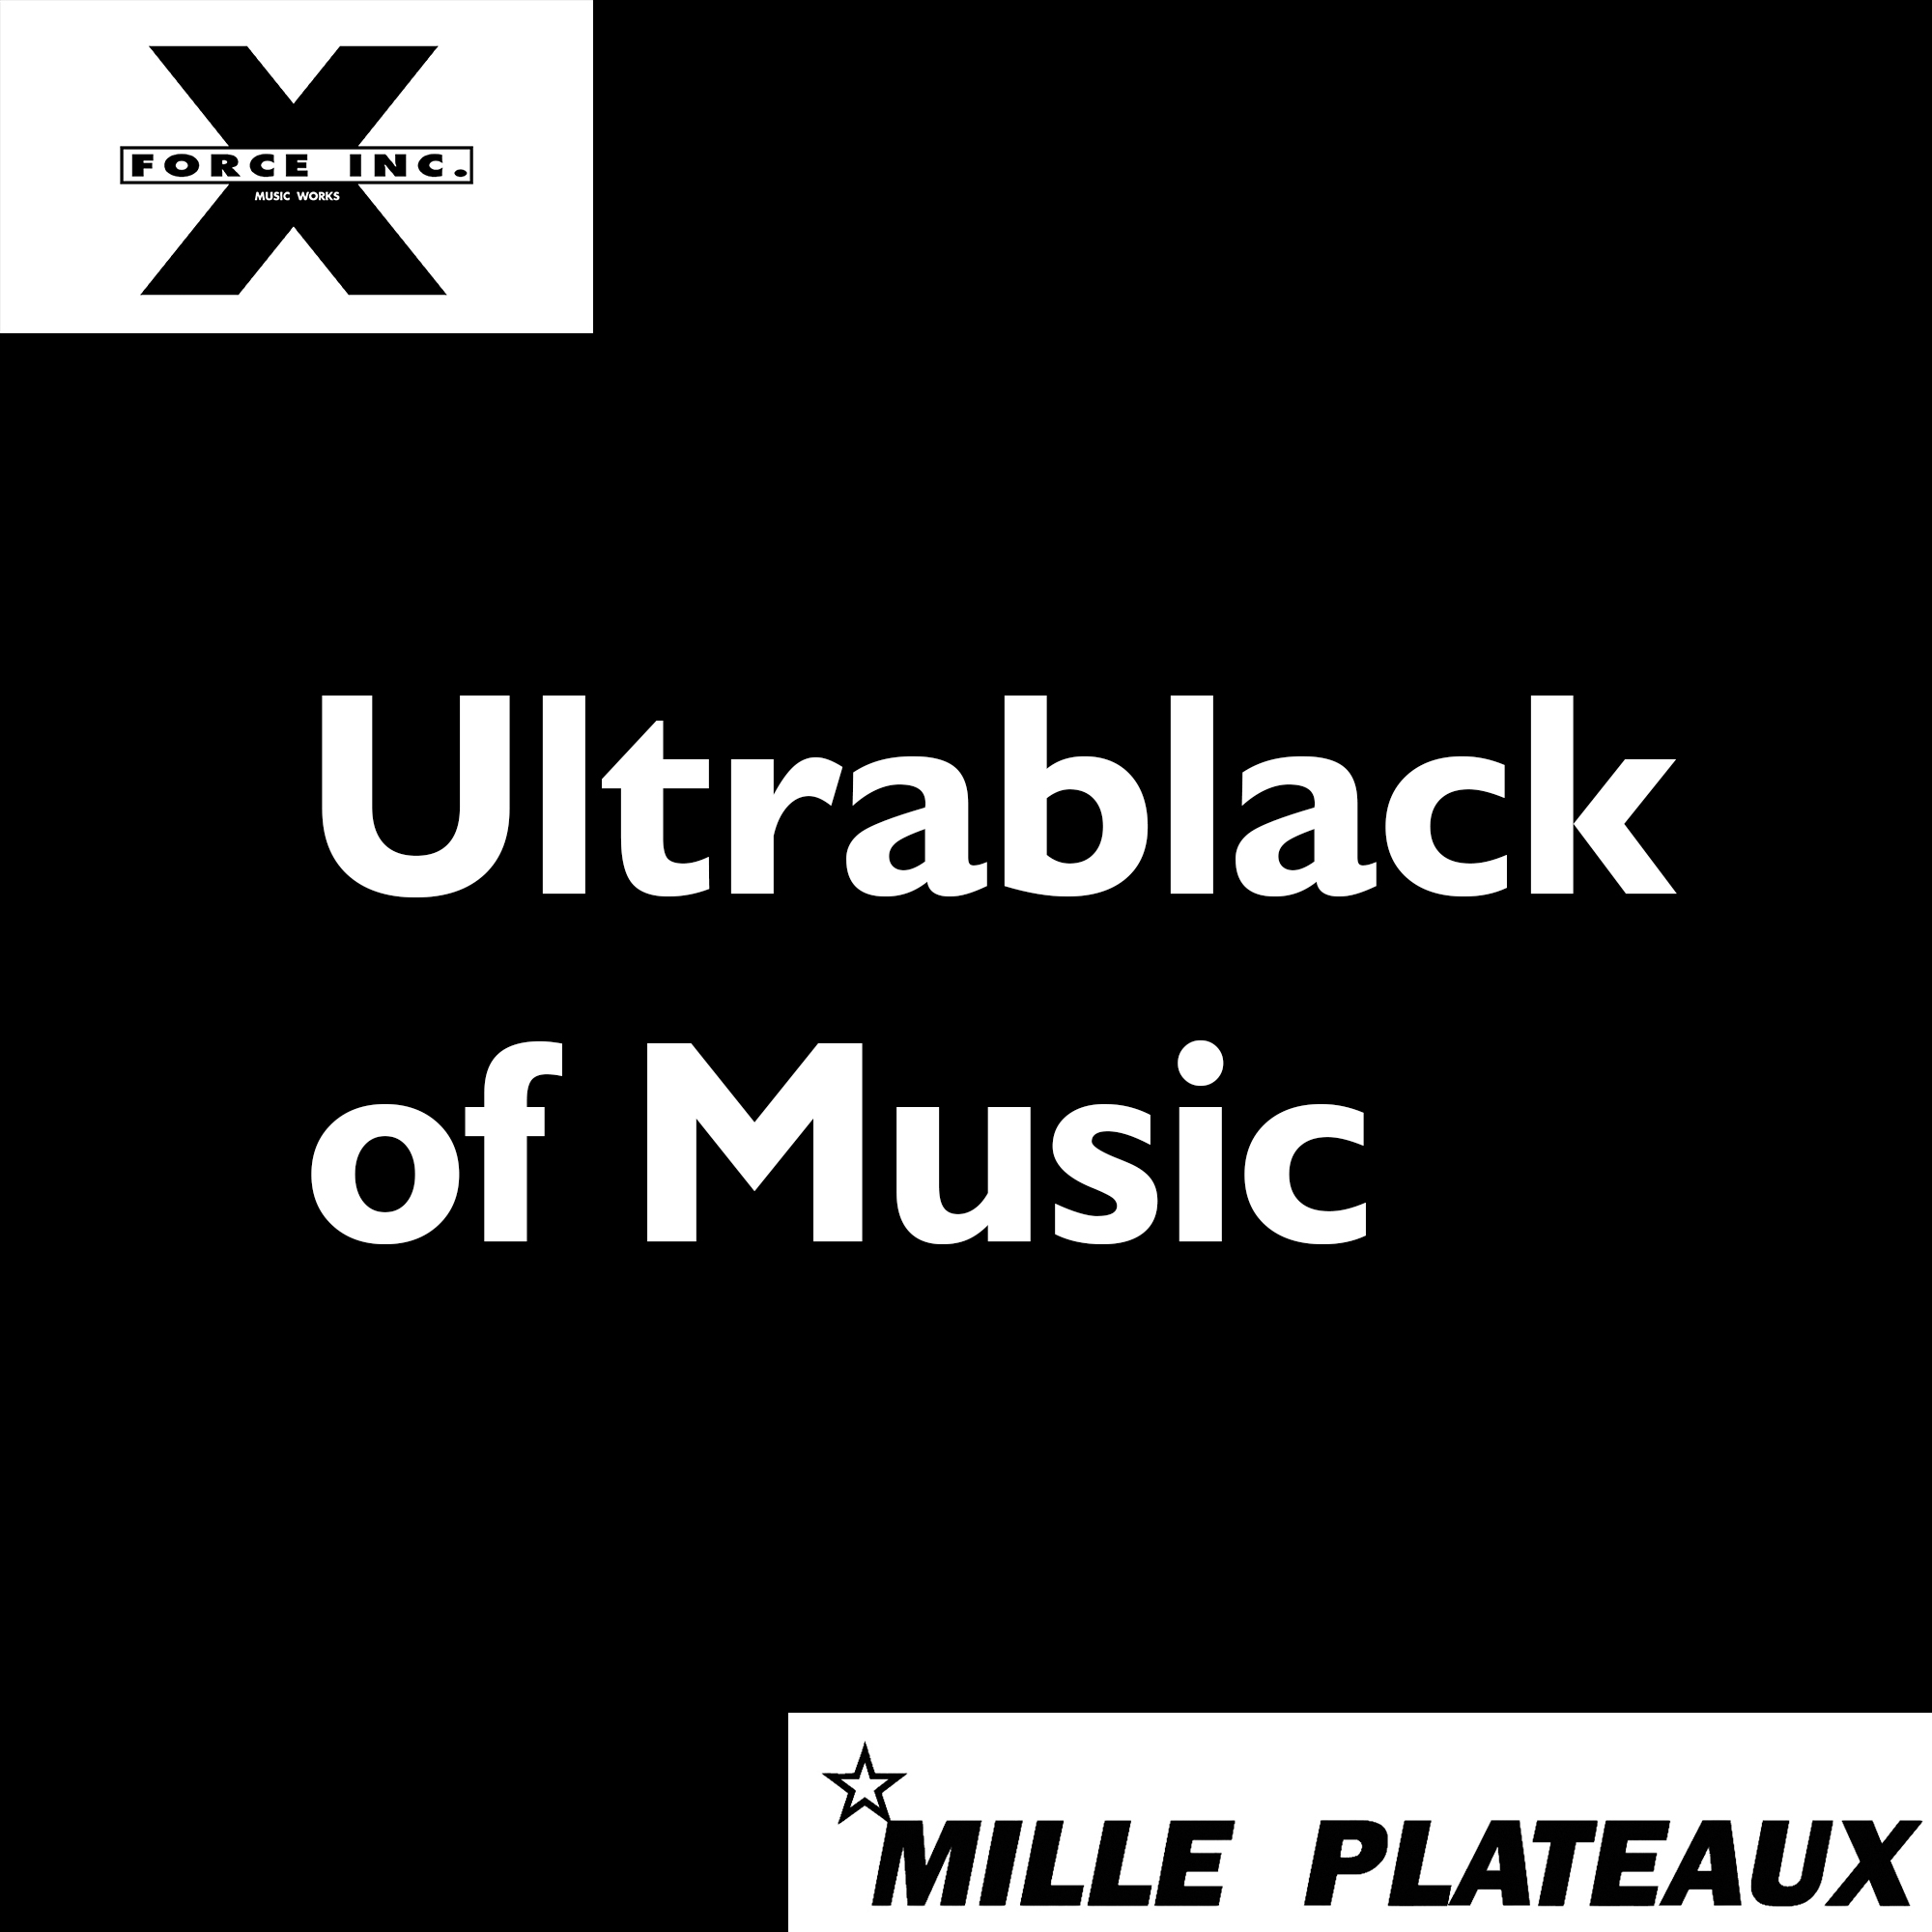 Ultra-blackness in Music. A Non-Mixology